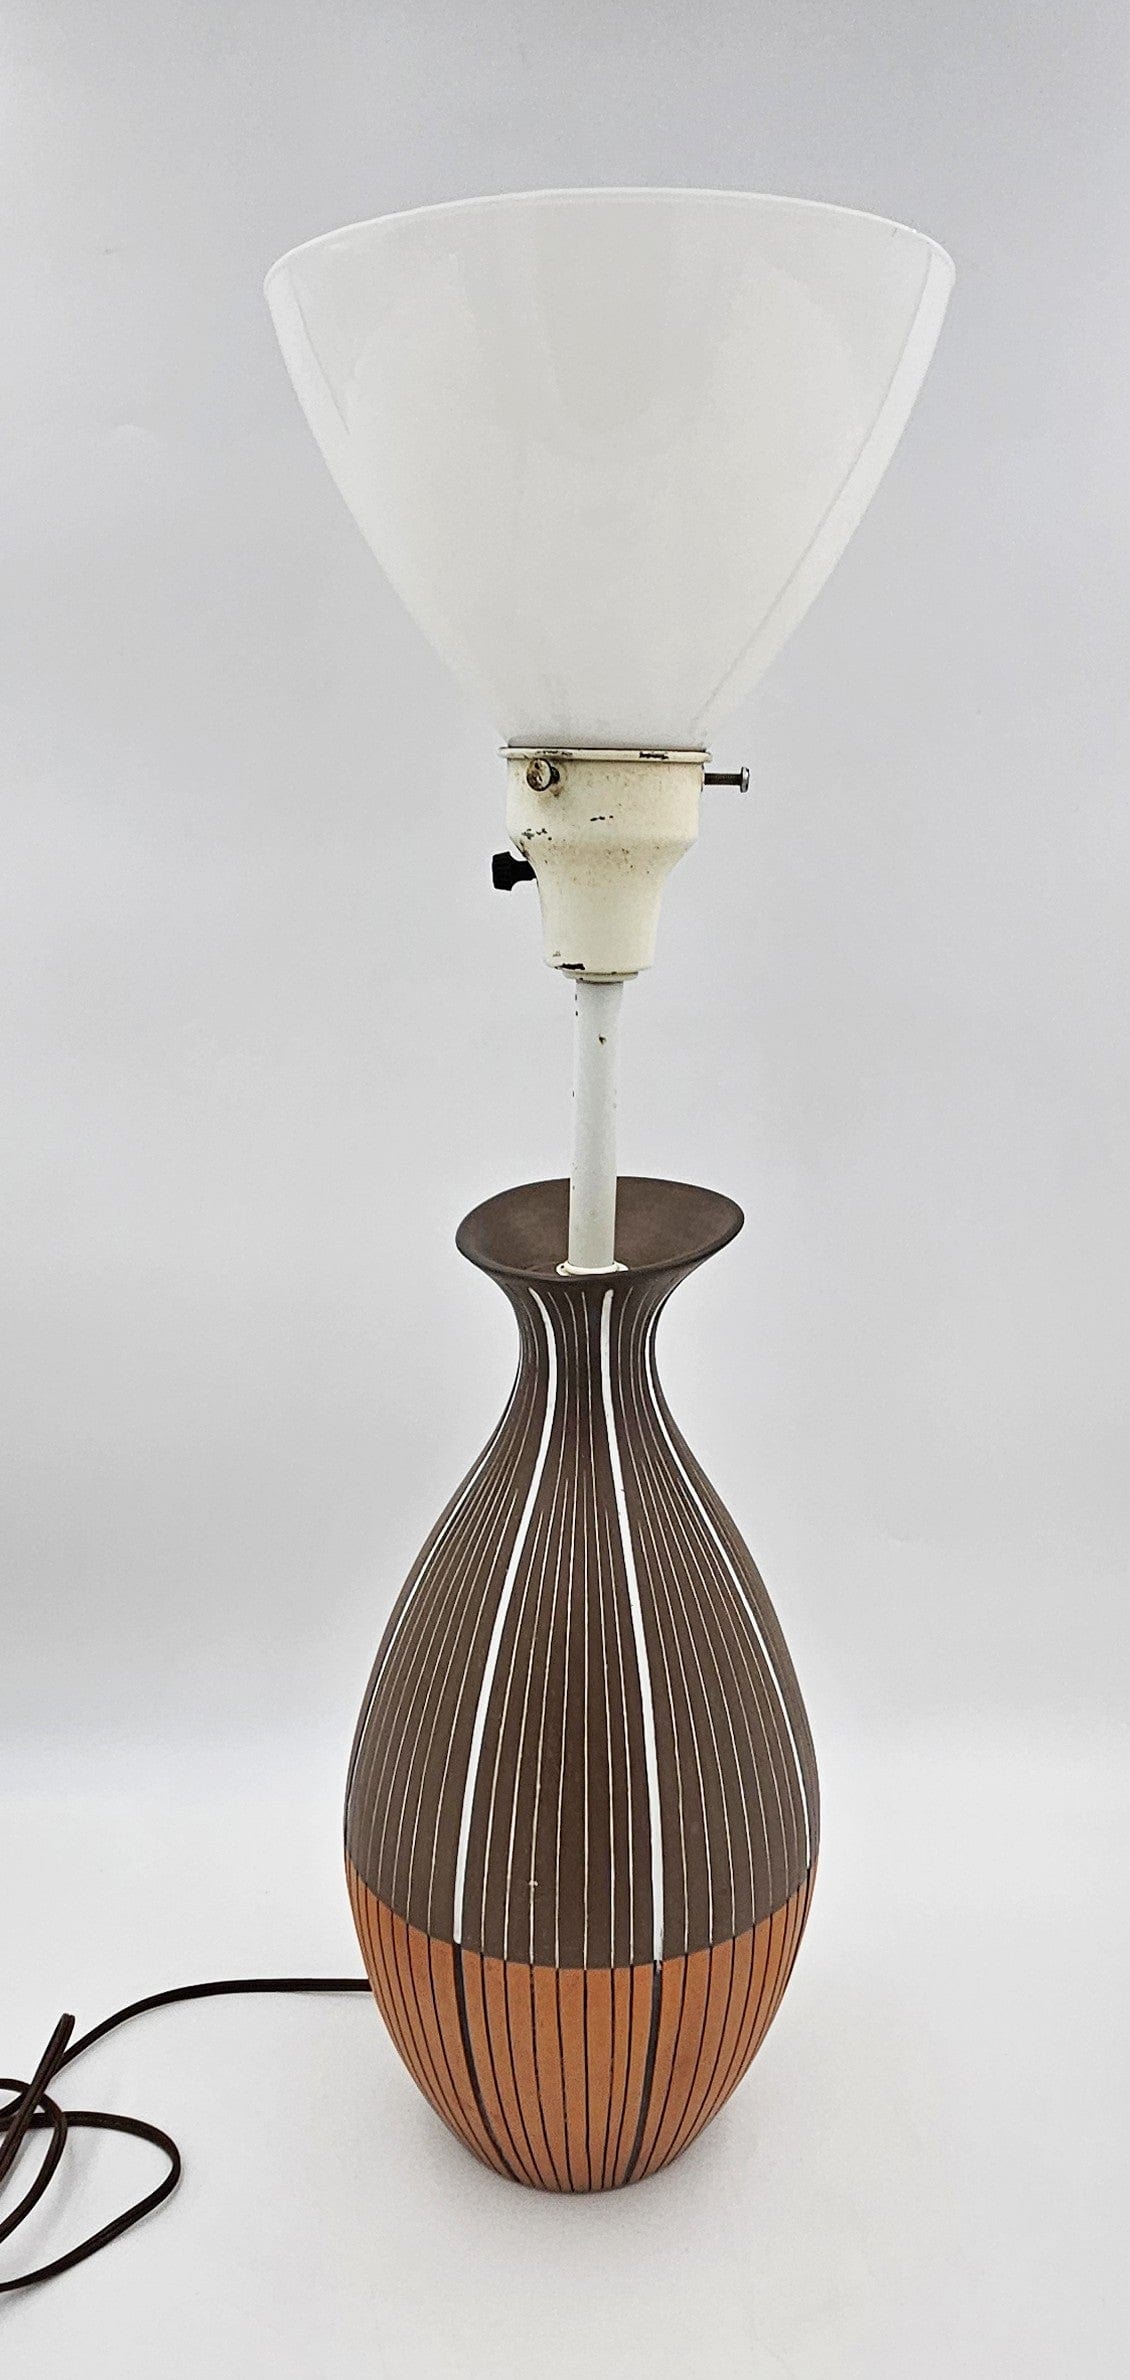 Ugo Zaccagnini Italy for Raymor Bitossi Lighting MCM Ugo Zaccagnini Italy Raymor Bitossi Ceramic Table Lamp #4000 Signed